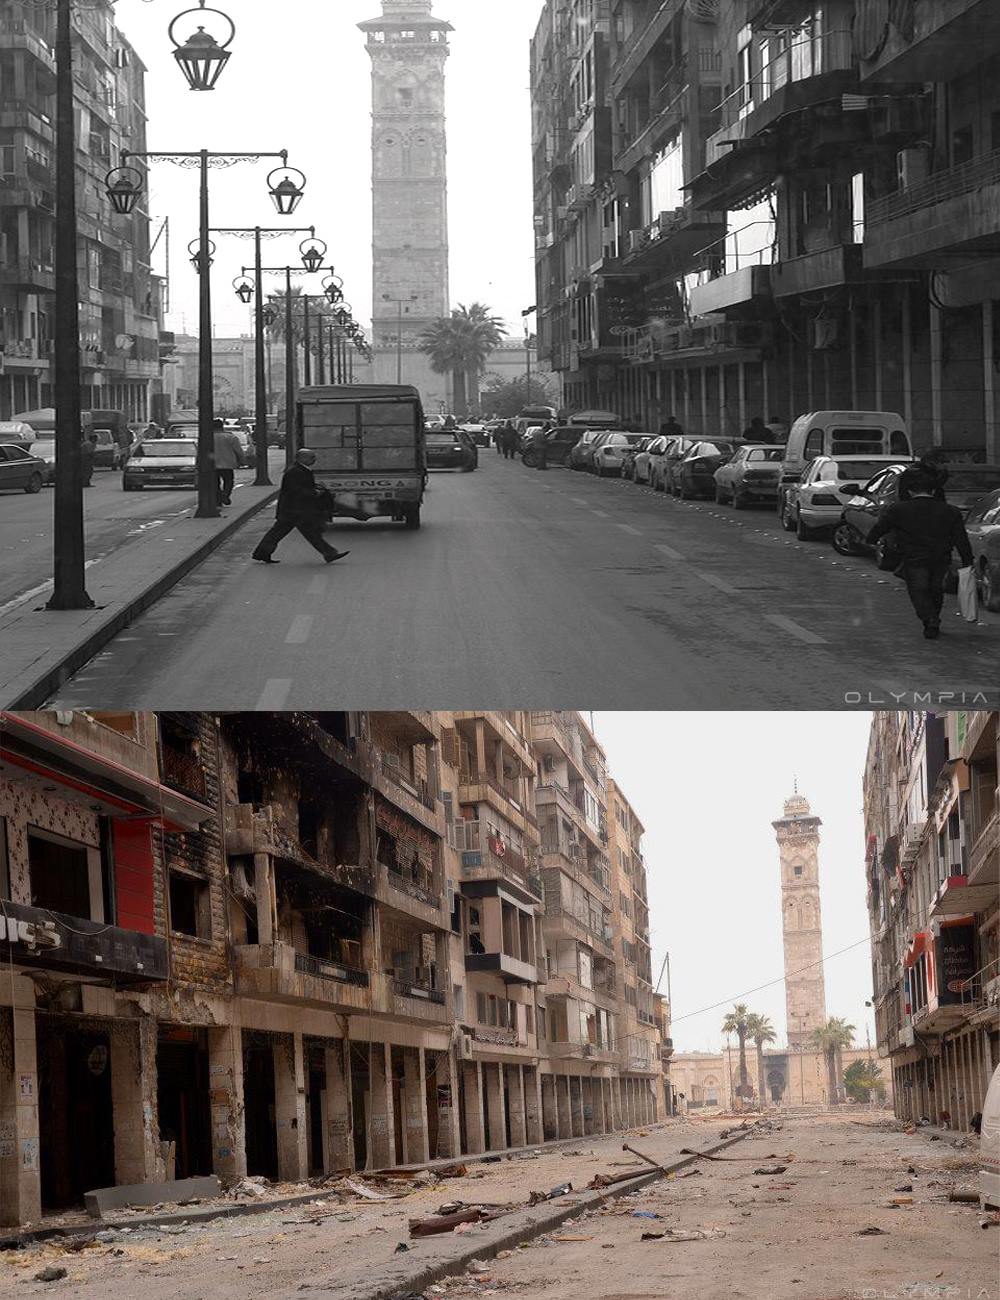 after sabotage and destruction and looting and burning the monuments and historical places, old houses, mosques, churches and the historical old markets (Souks) which are classified as Sites of World Heritage by UNESCO since 1986.